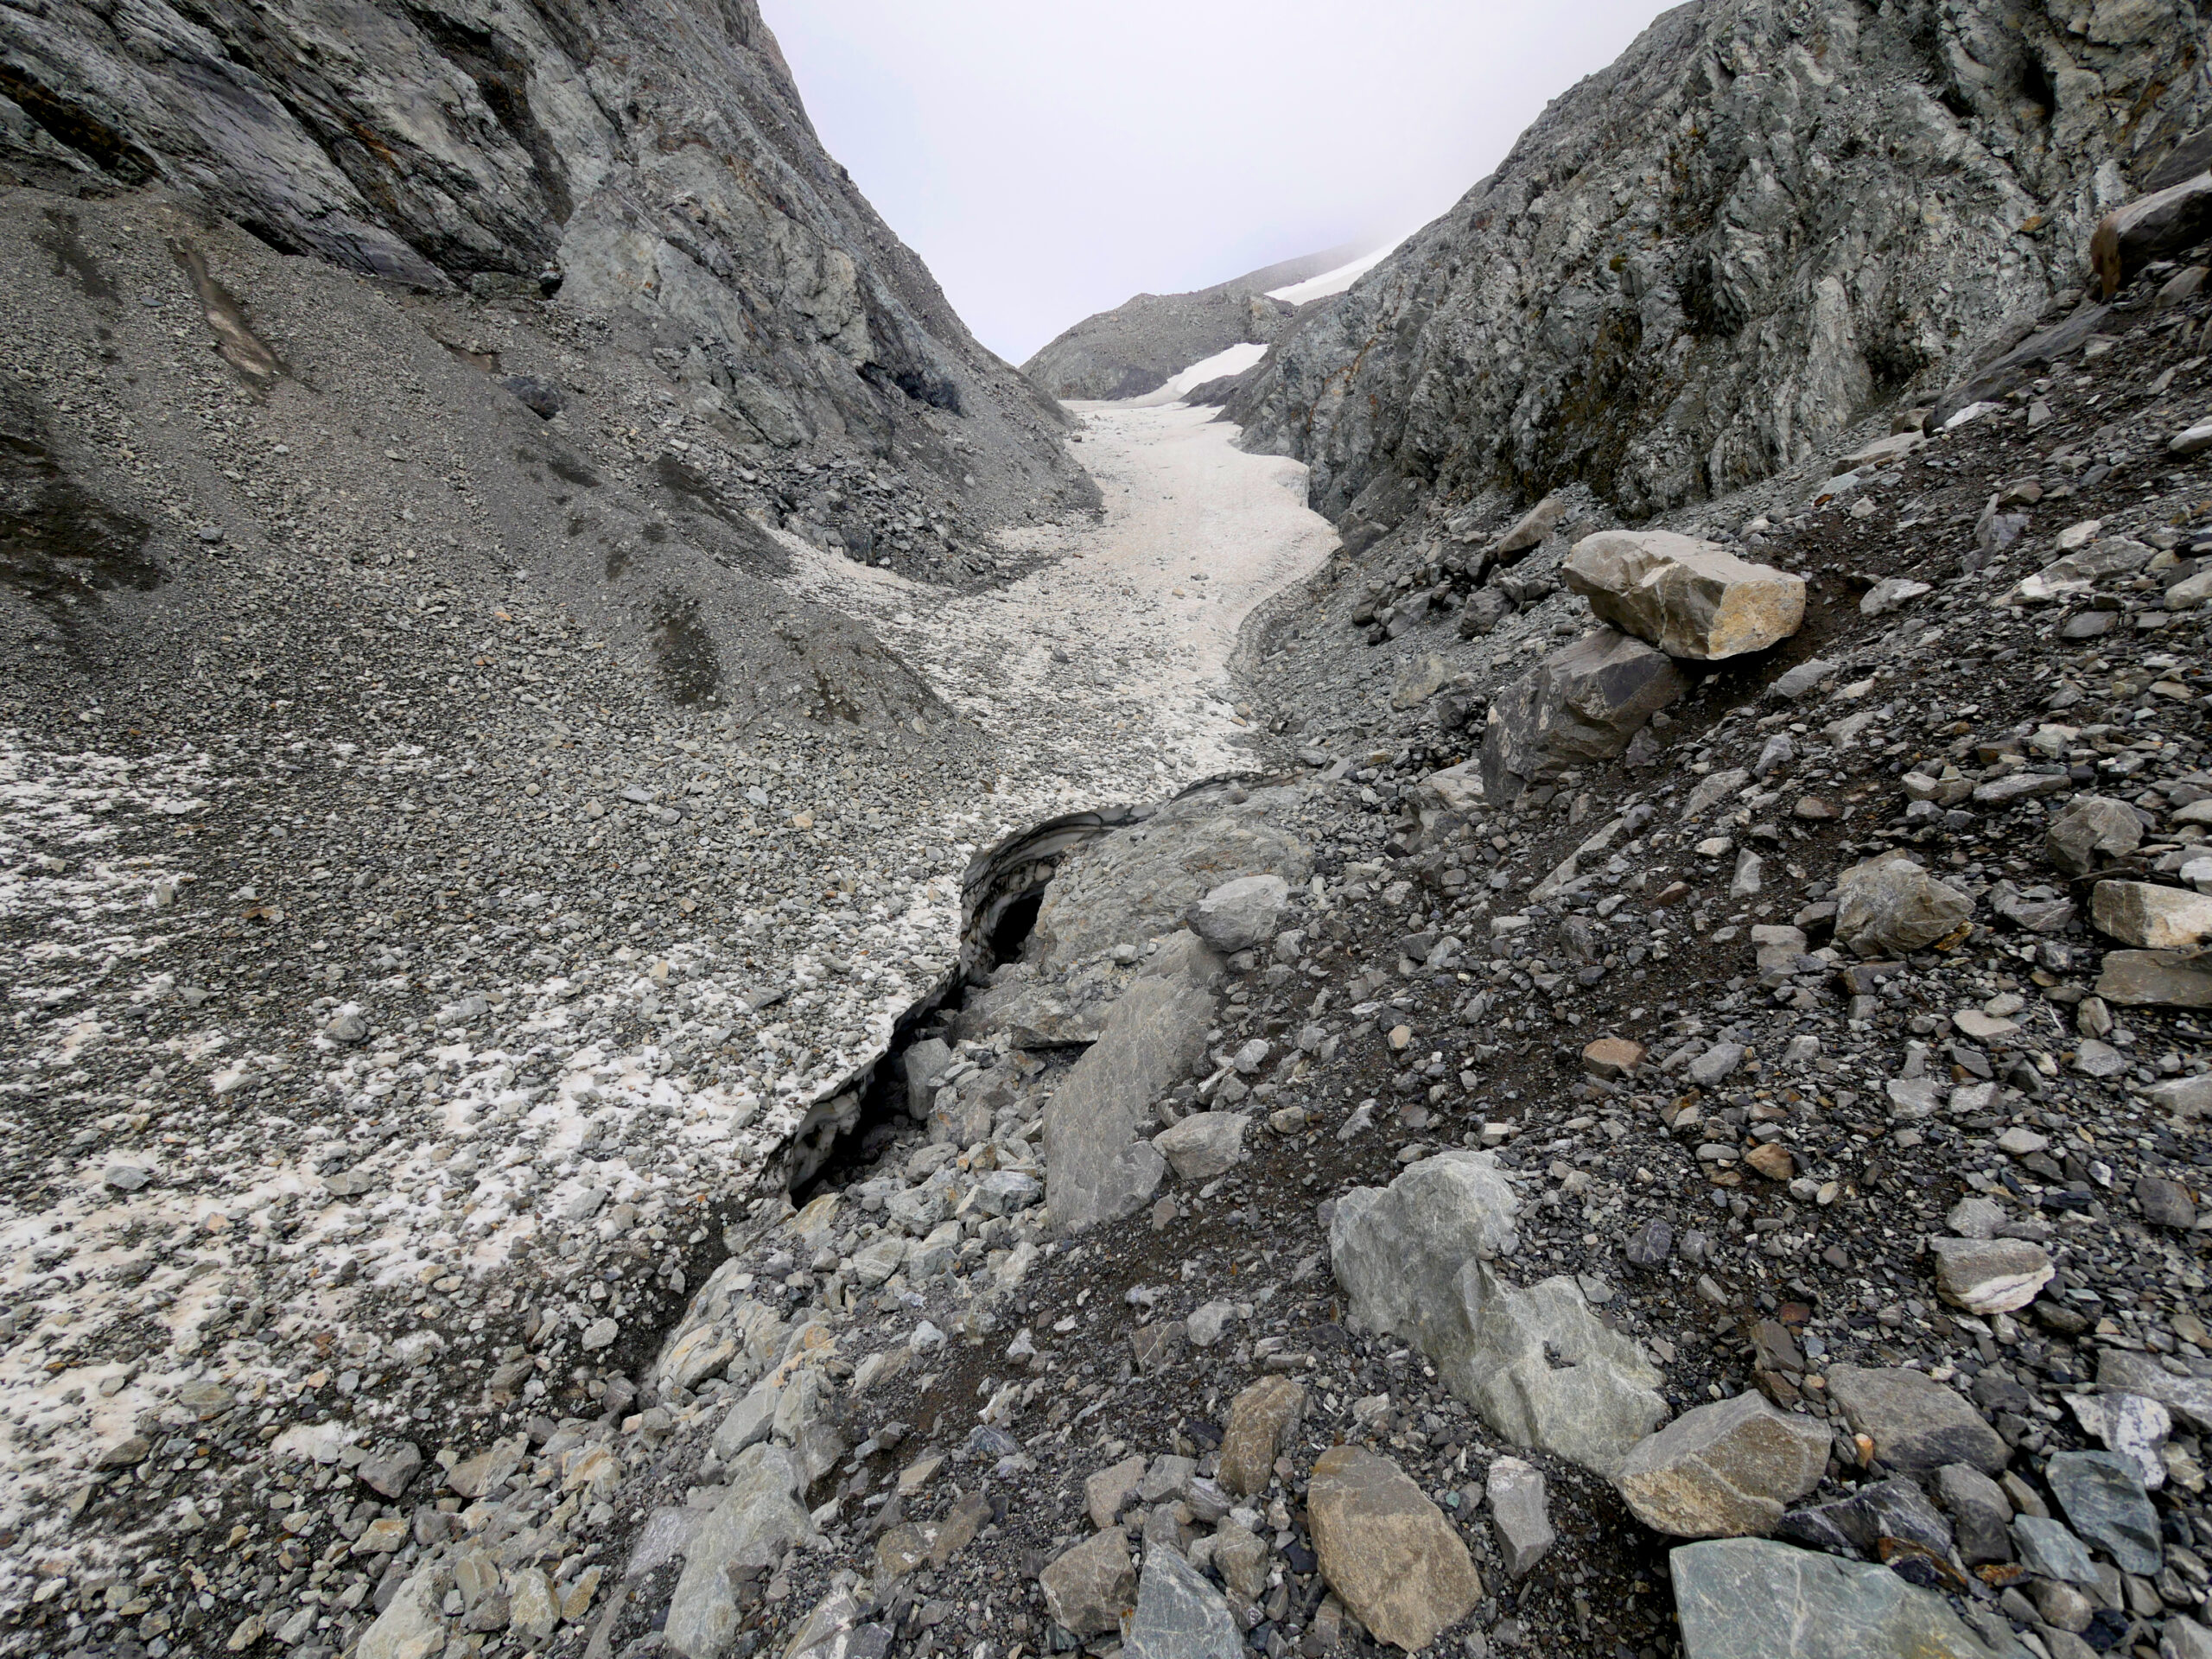 The route up Whitehorn Pass is covered in snow and ice fields. Crevasses below the melting snow are clearly visible.